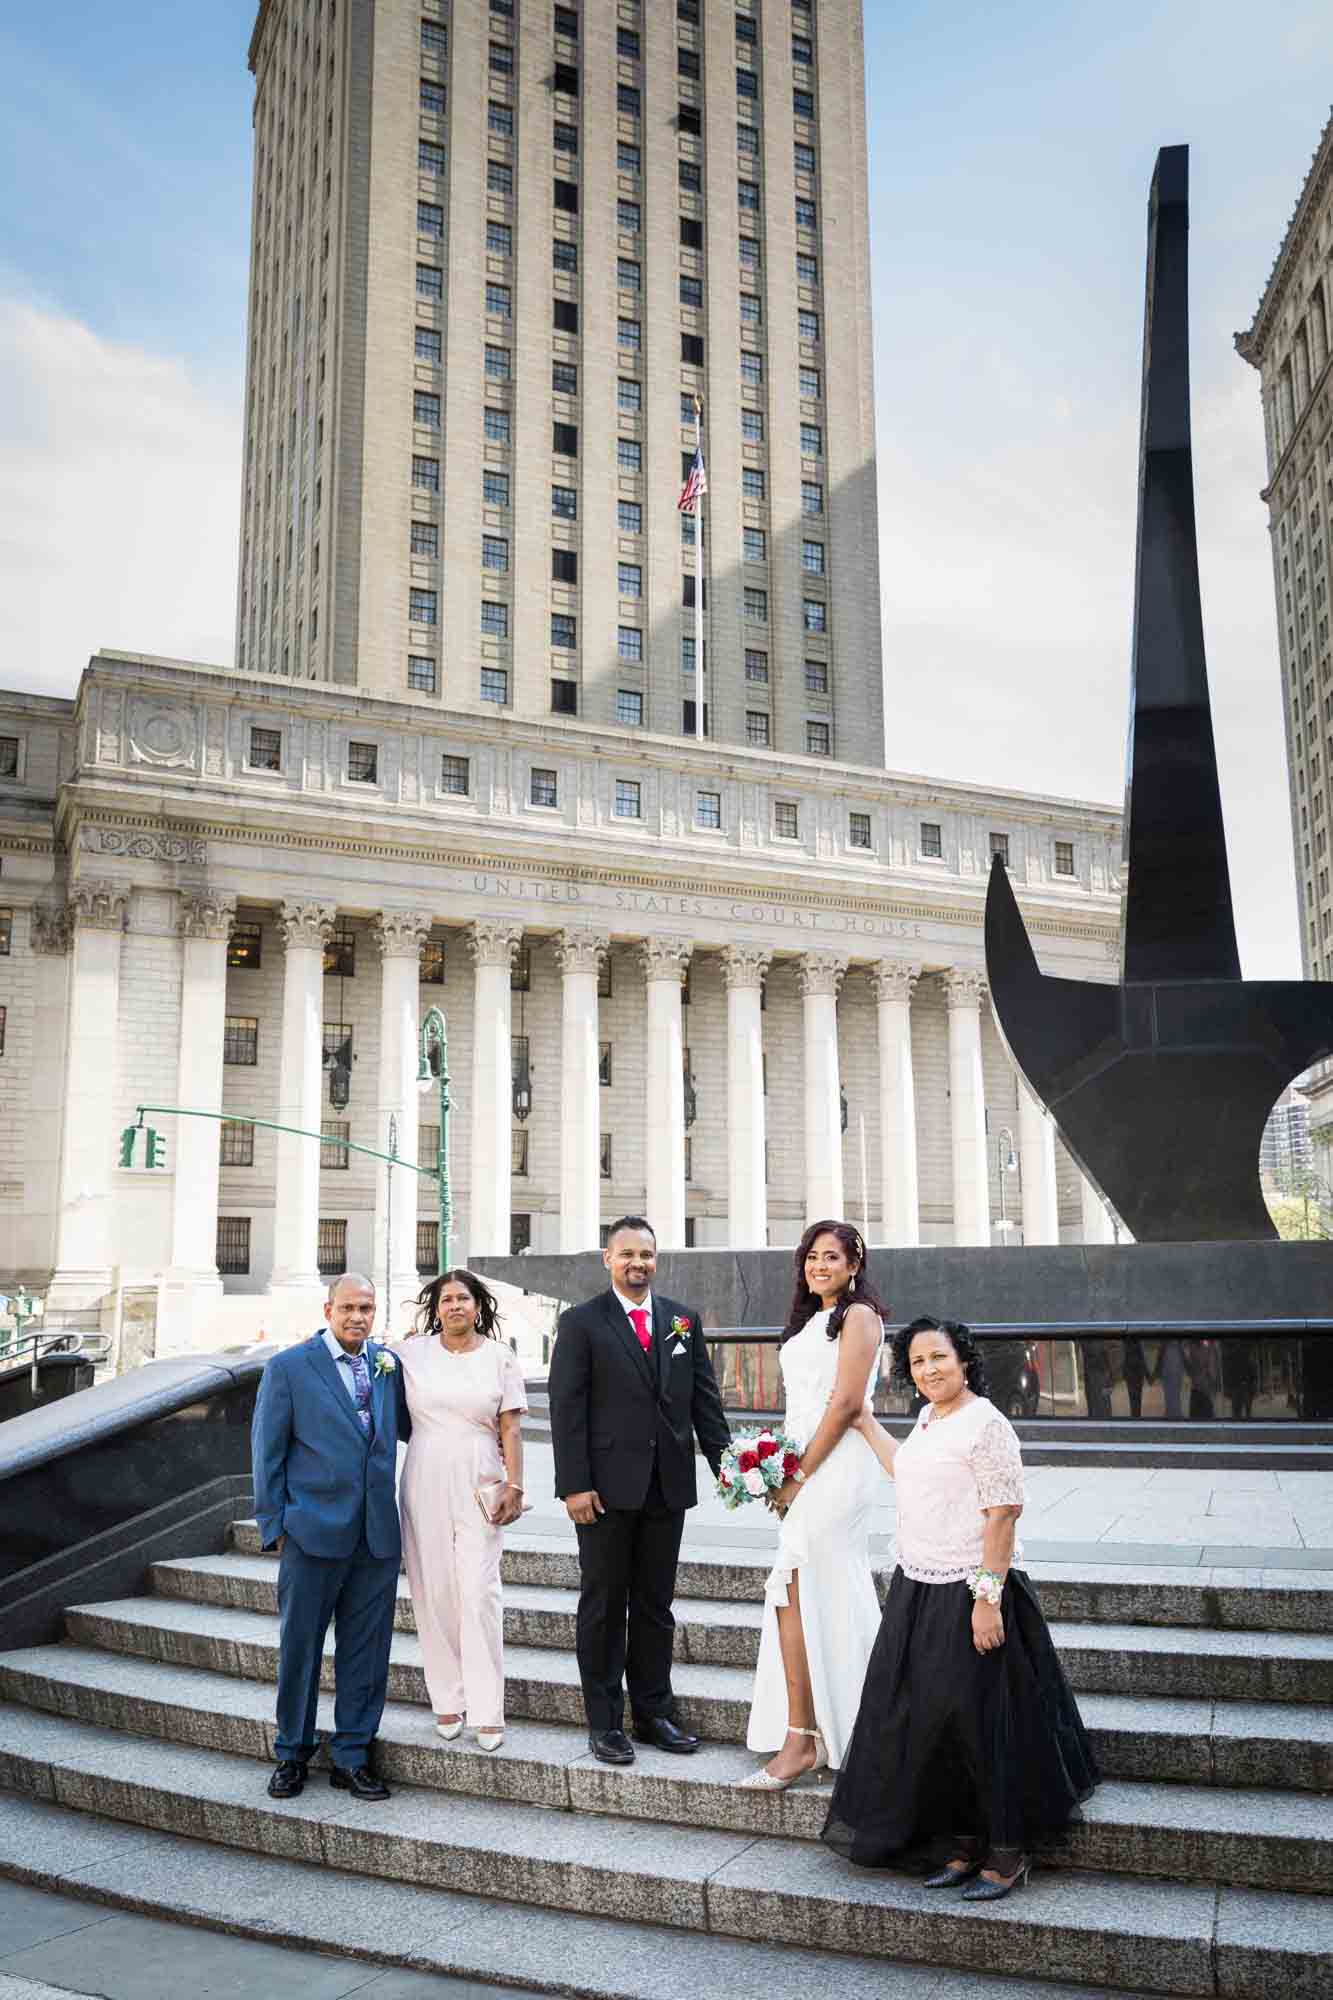 Bride and groom and family on stone steps in front of building and sword statue  at a NYC City Hall wedding